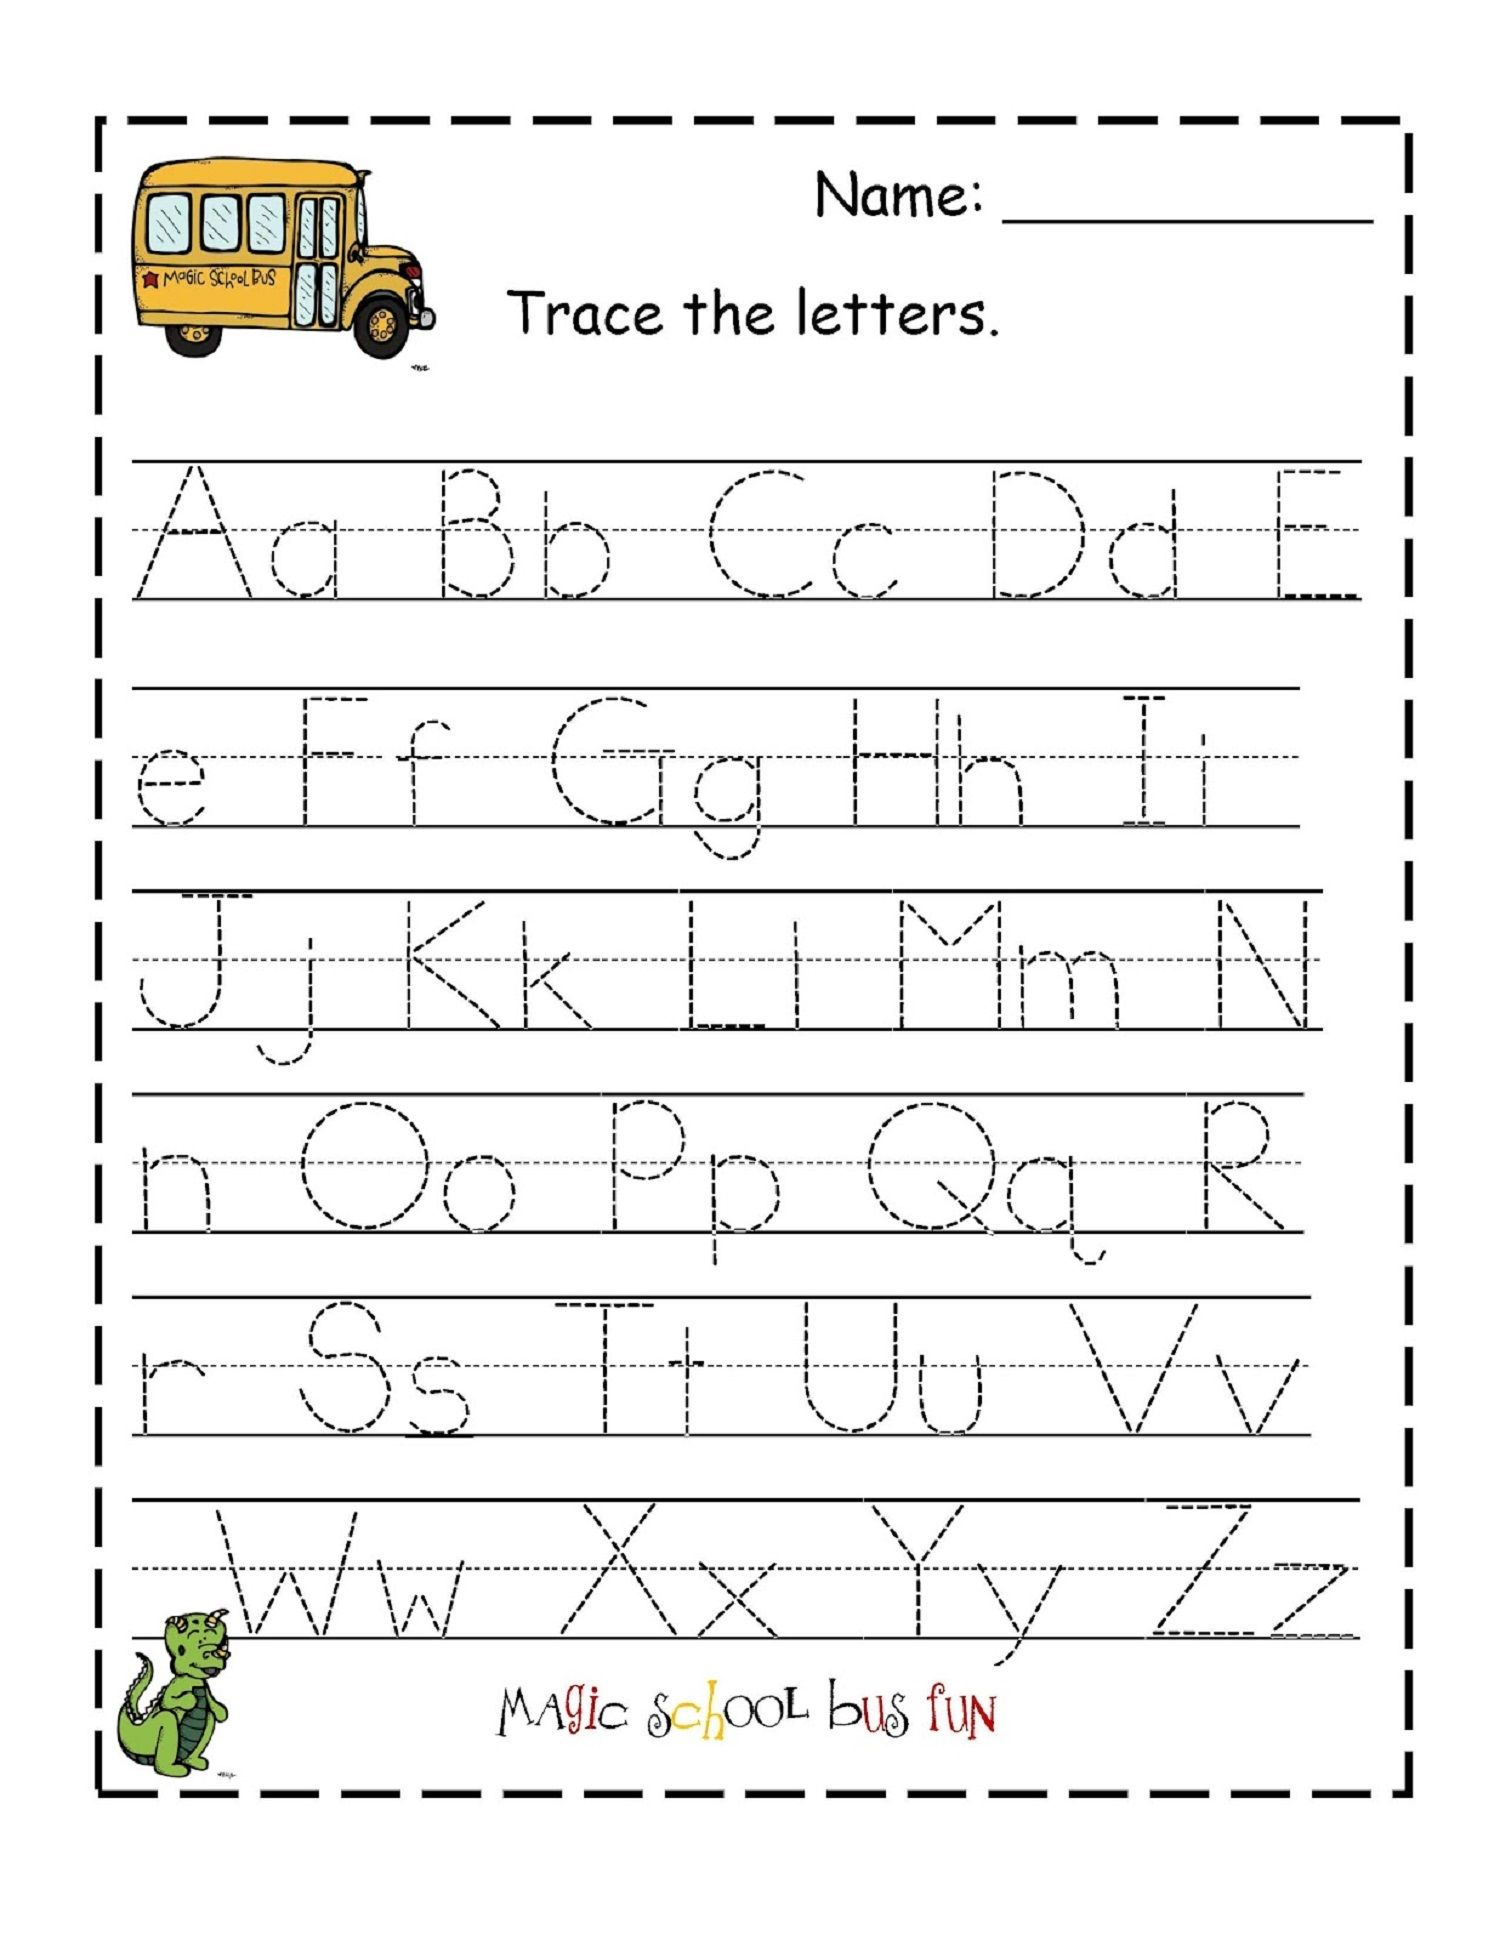 Traceable Alphabet For Learning Exercise | Letter Tracing in Tracing Letter A Worksheets For Kindergarten